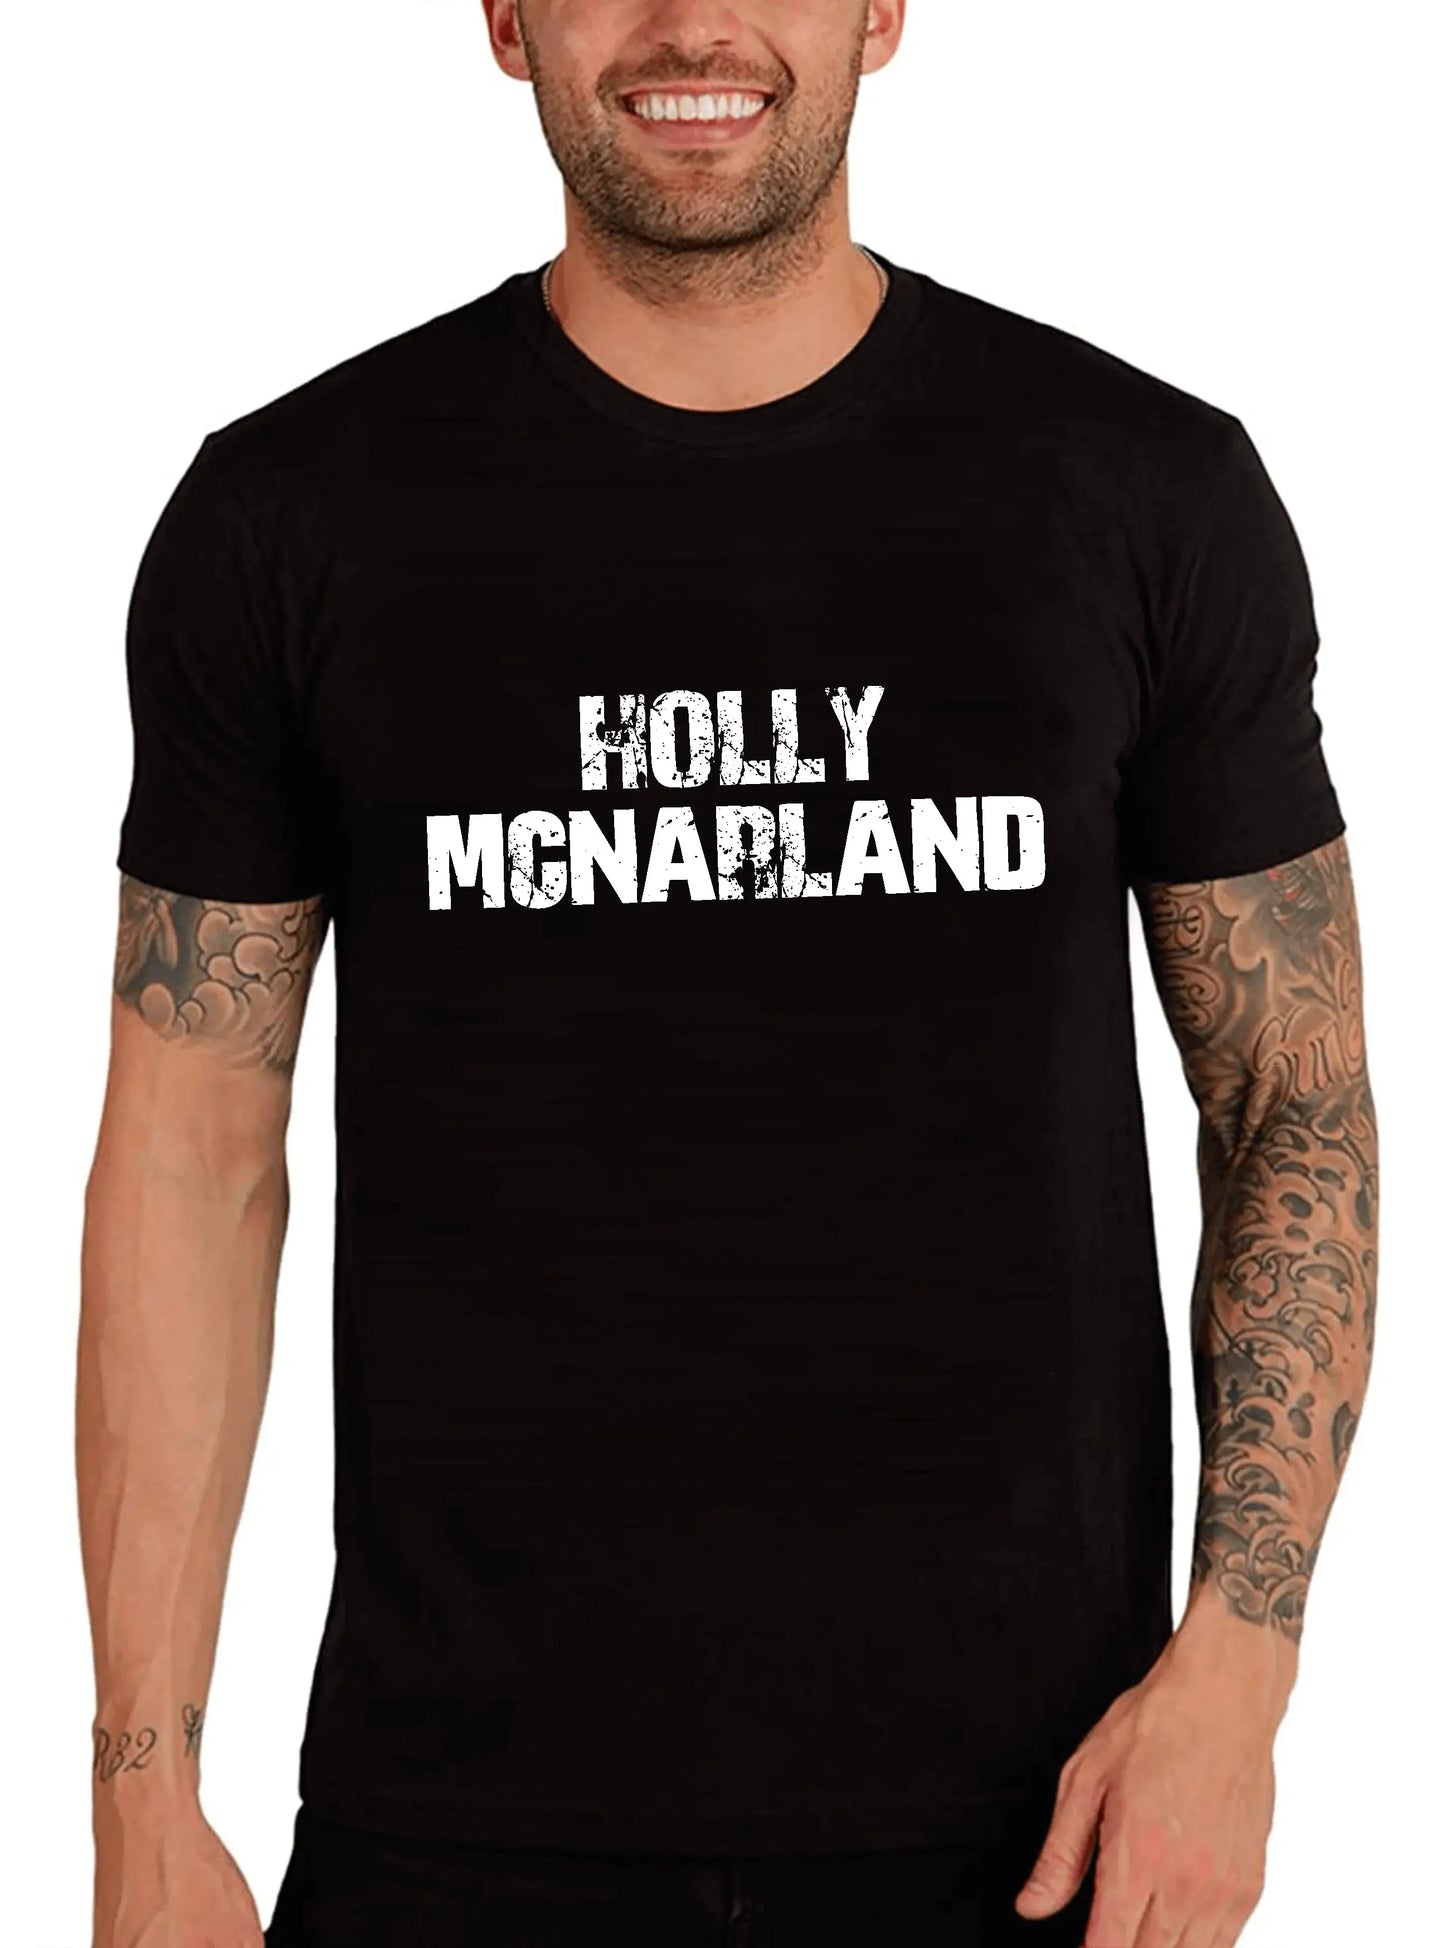 Men's Graphic T-Shirt Holly Mcnarland Eco-Friendly Limited Edition Short Sleeve Tee-Shirt Vintage Birthday Gift Novelty